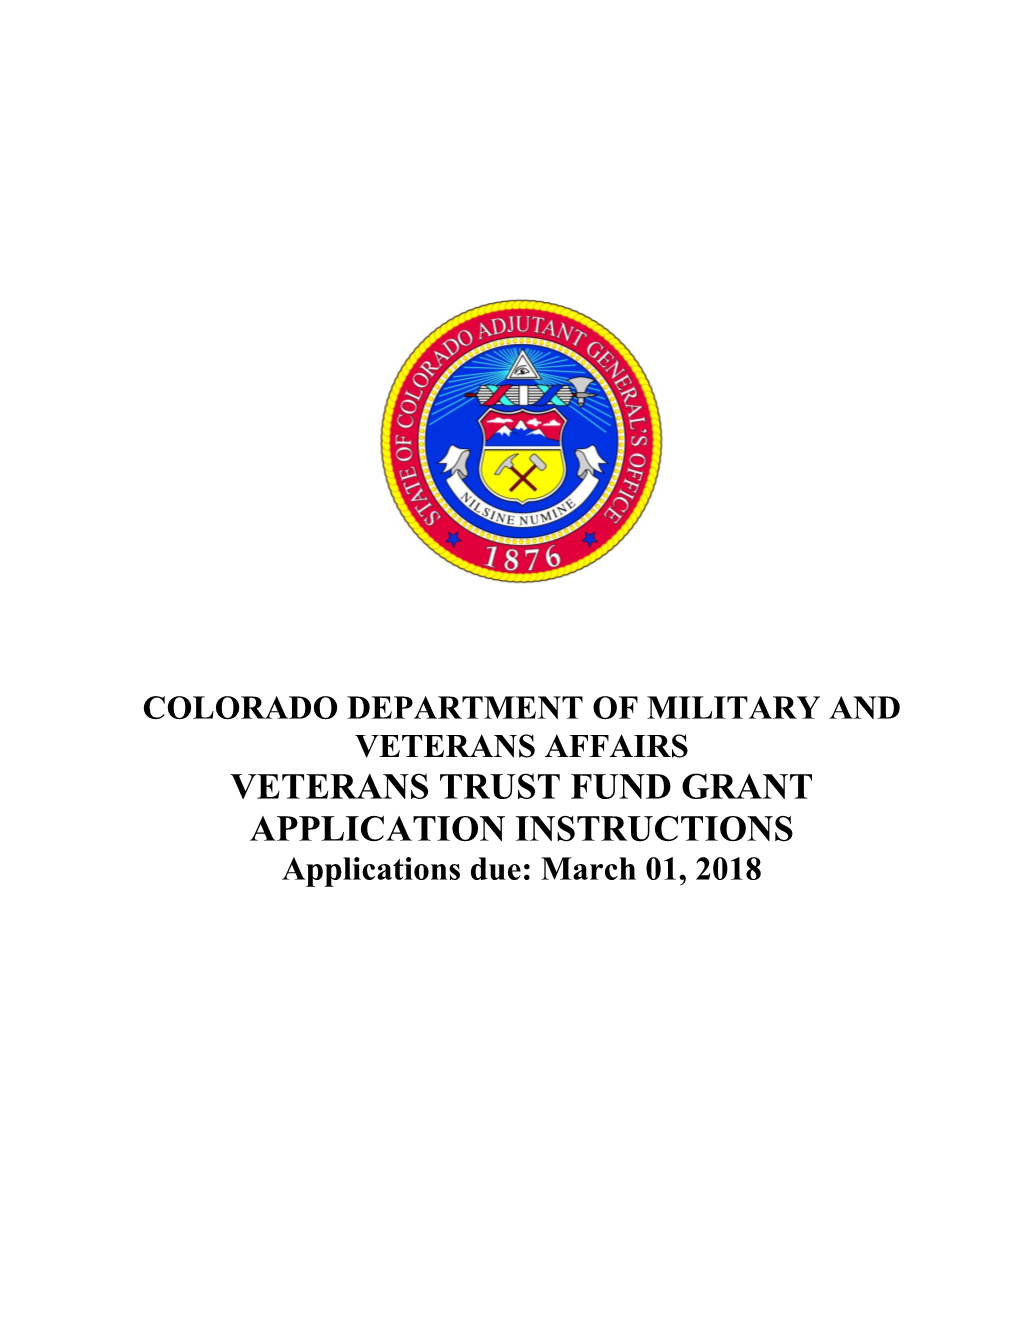 Colorado Department of Military and Veterans Affairs